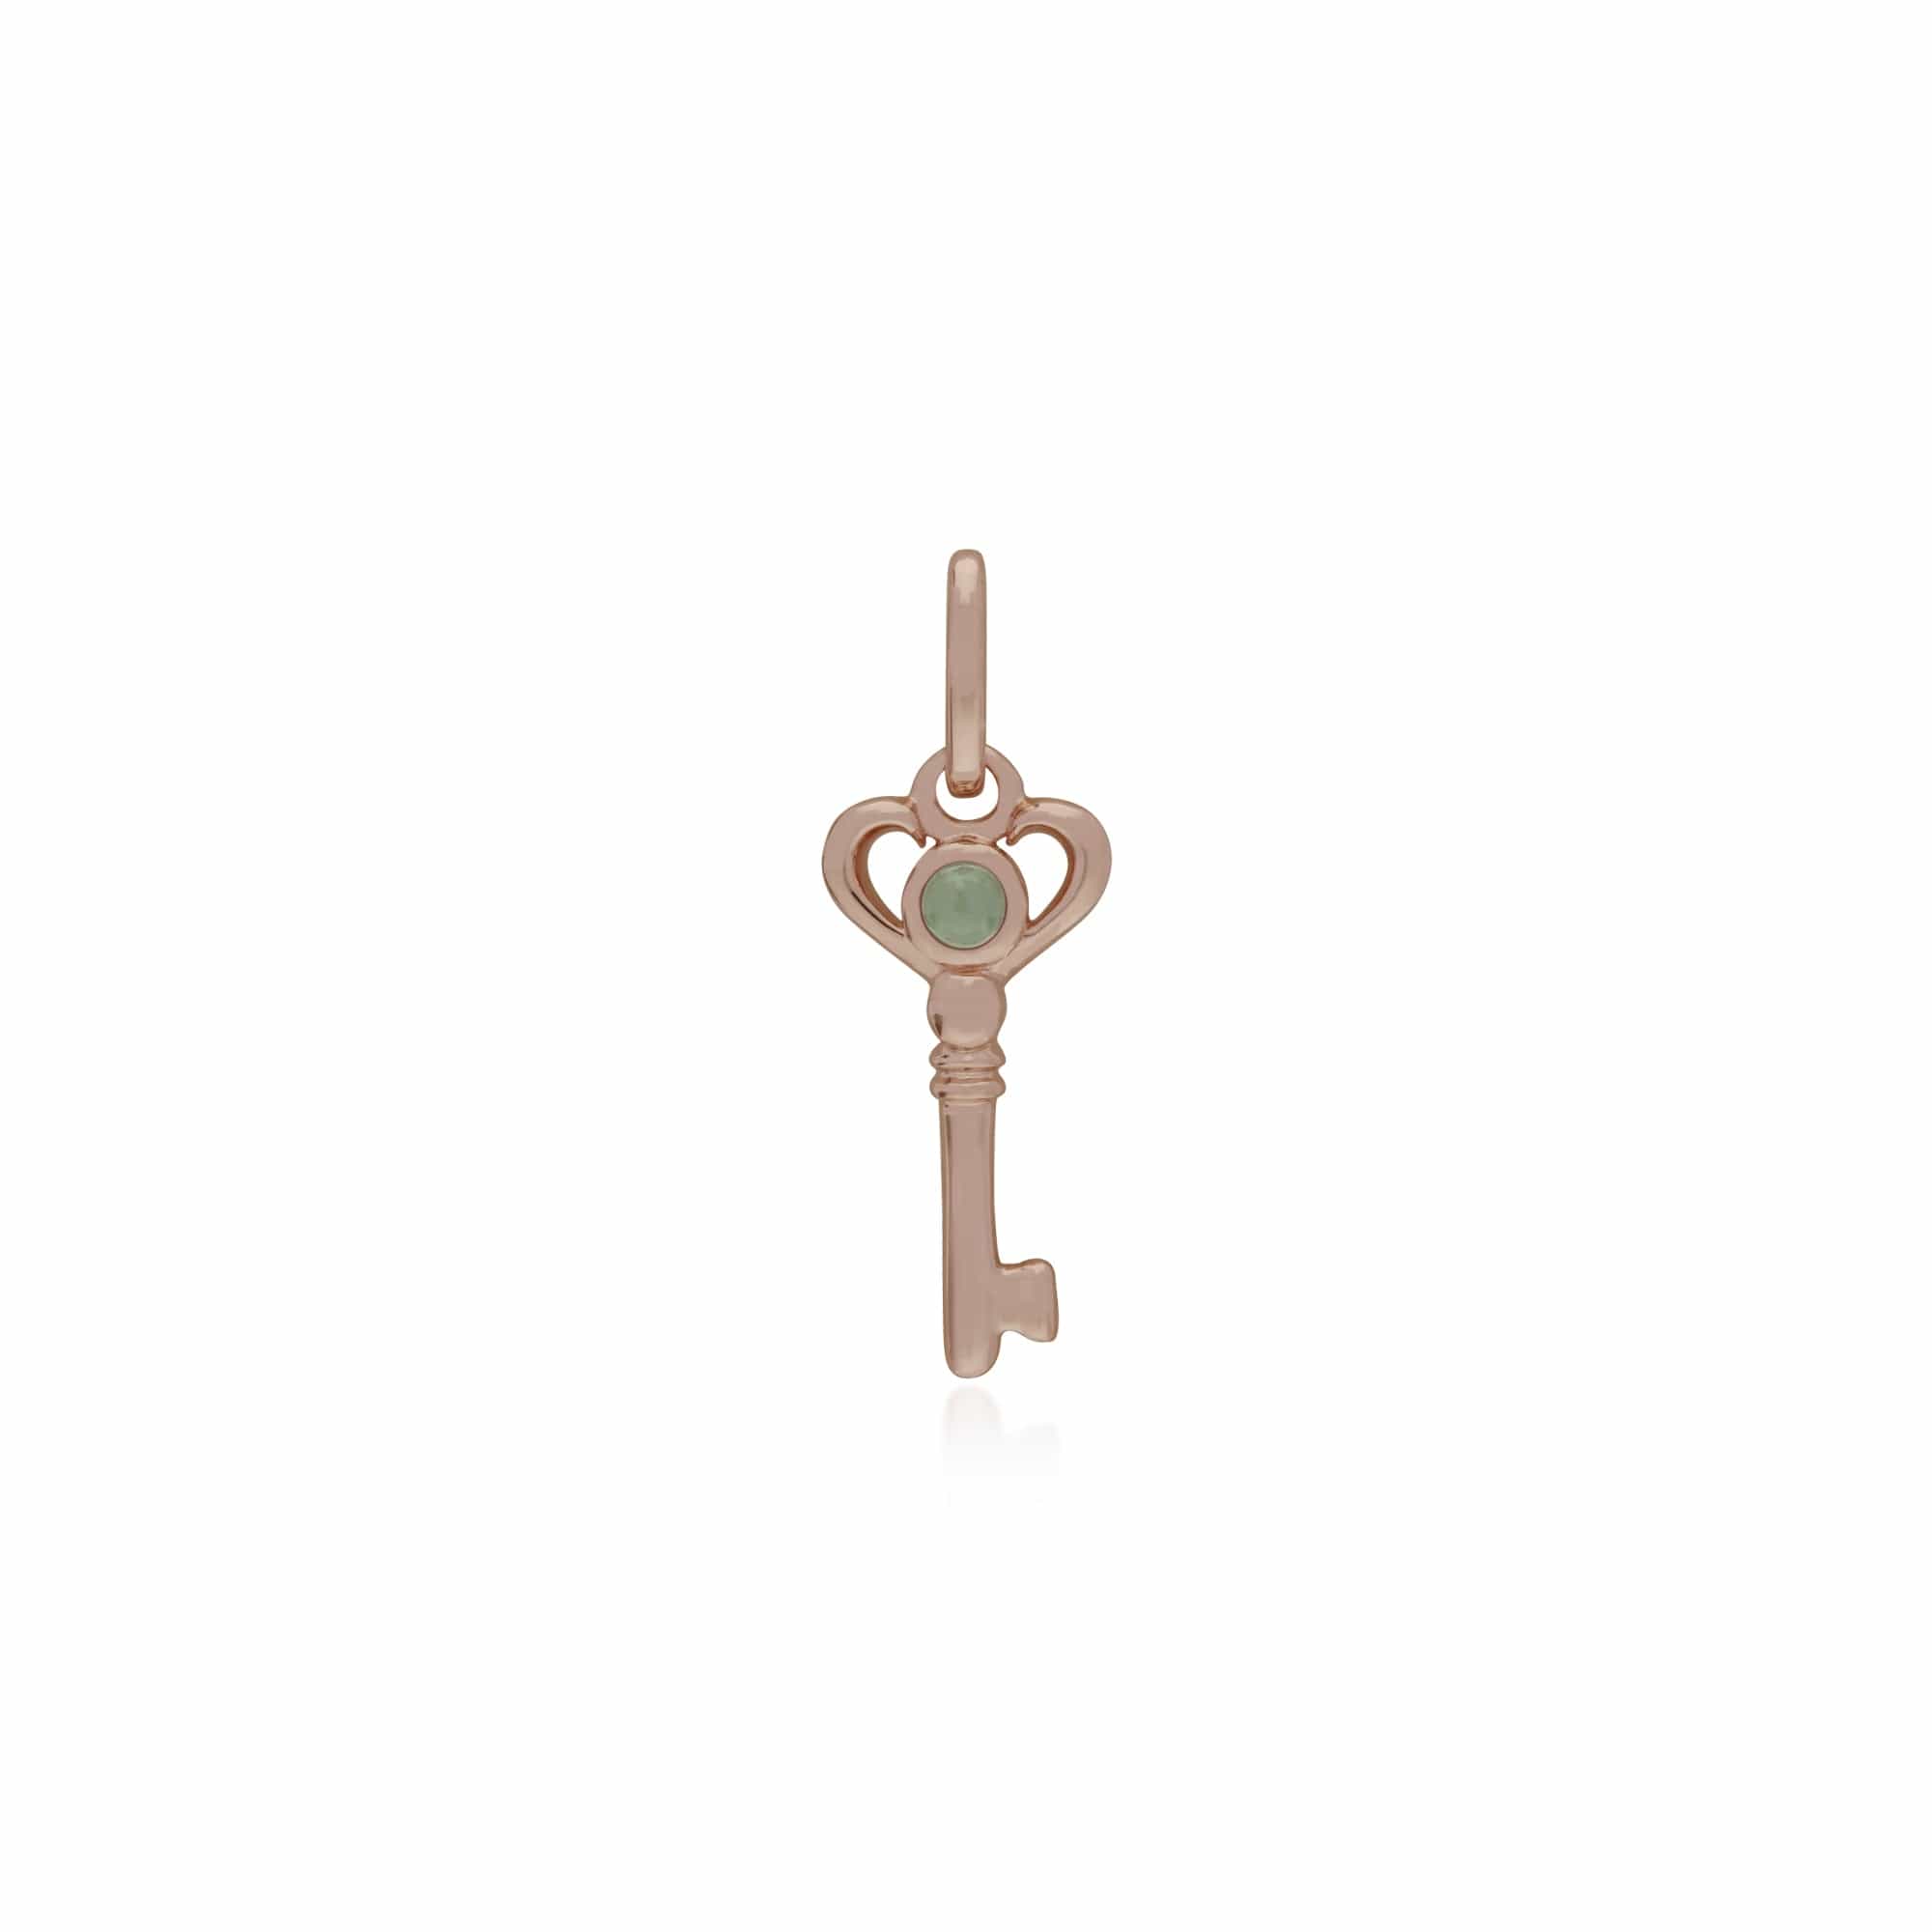 270P028603925-270P026901925 Classic Heart Lock Pendant & Jade Key Charm in Rose Gold Plated 925 Sterling Silver 2